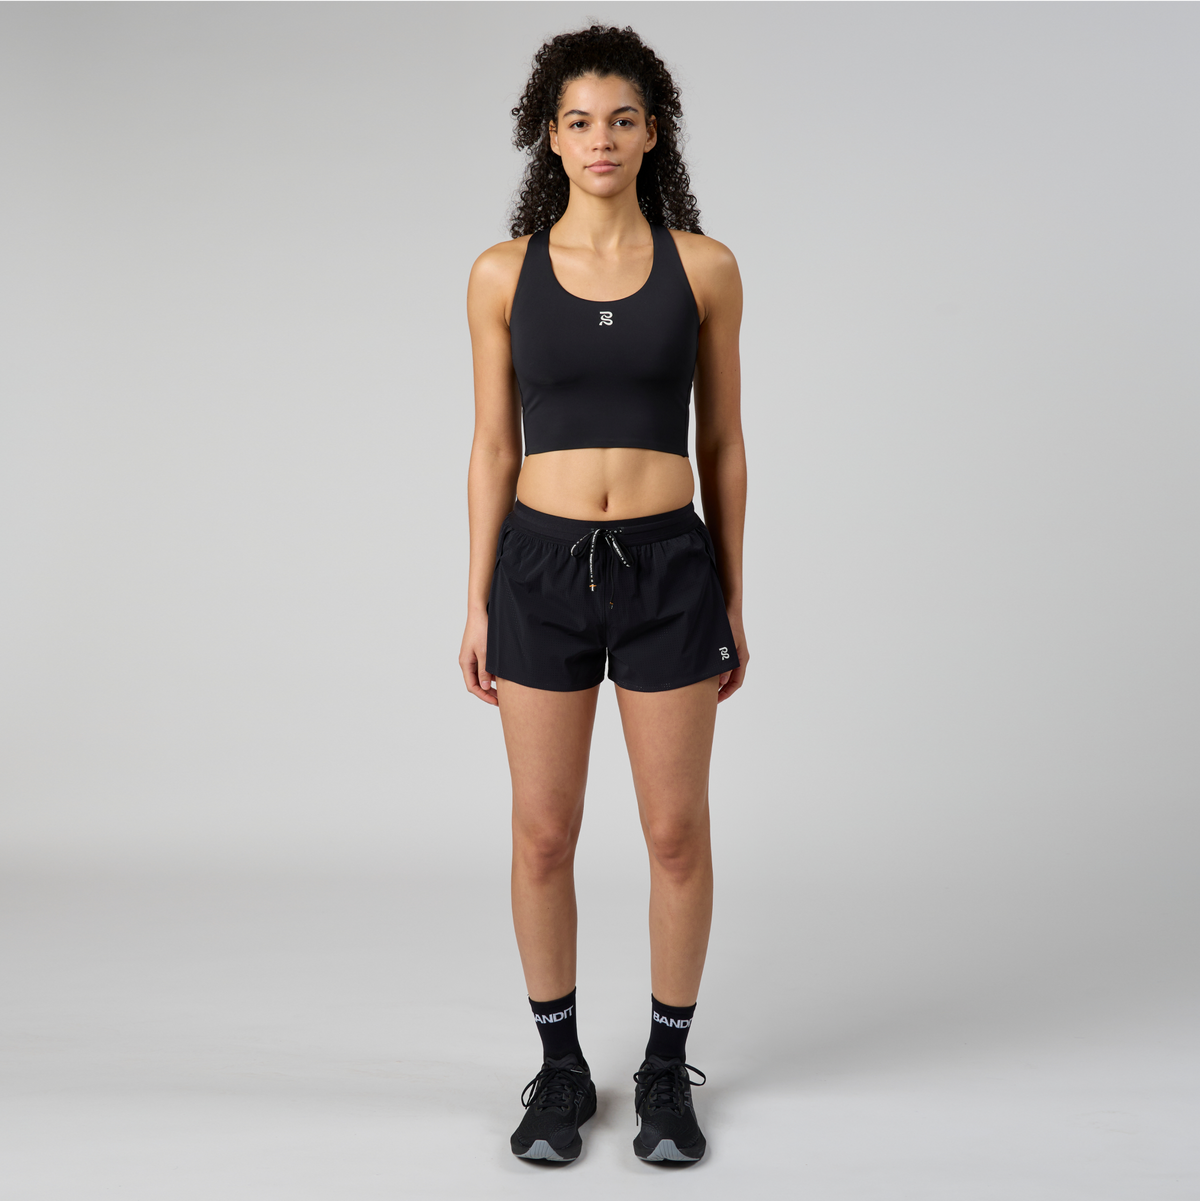 Buy Black Shorts for Women by Outryt Sport Online